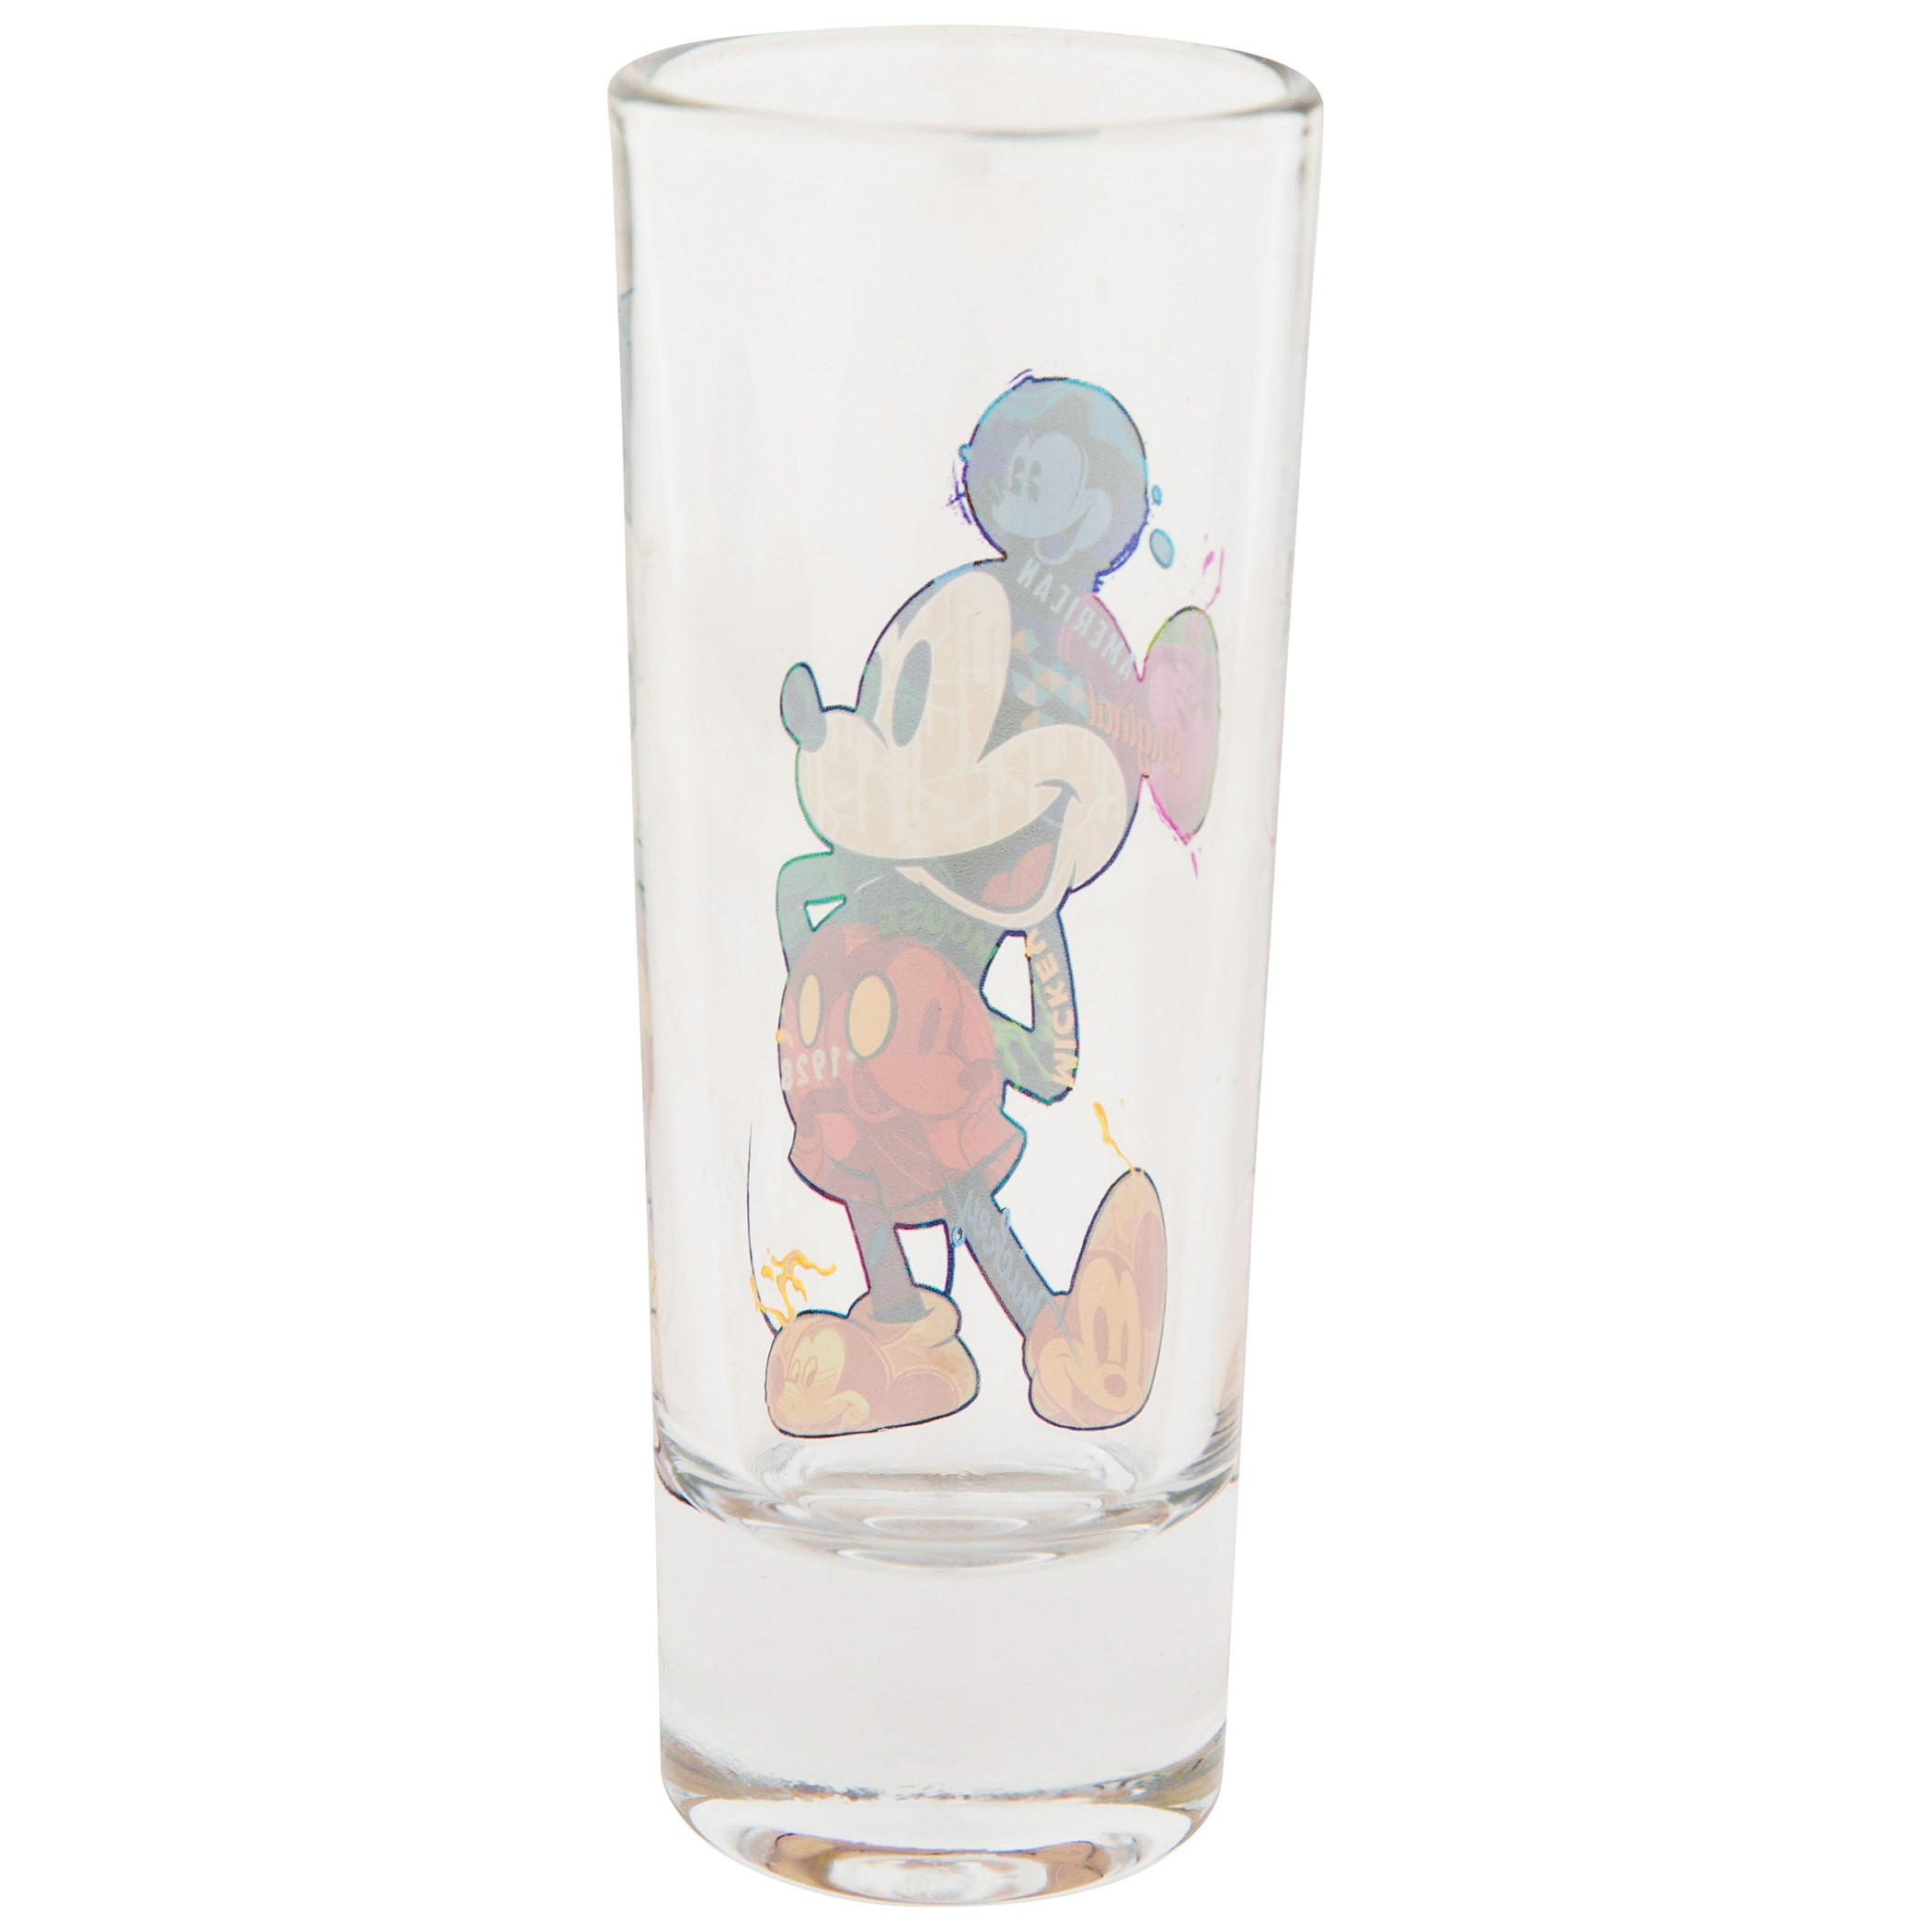 Mickey Mouse Color Collage Colored Bottom Collection Shot Glass